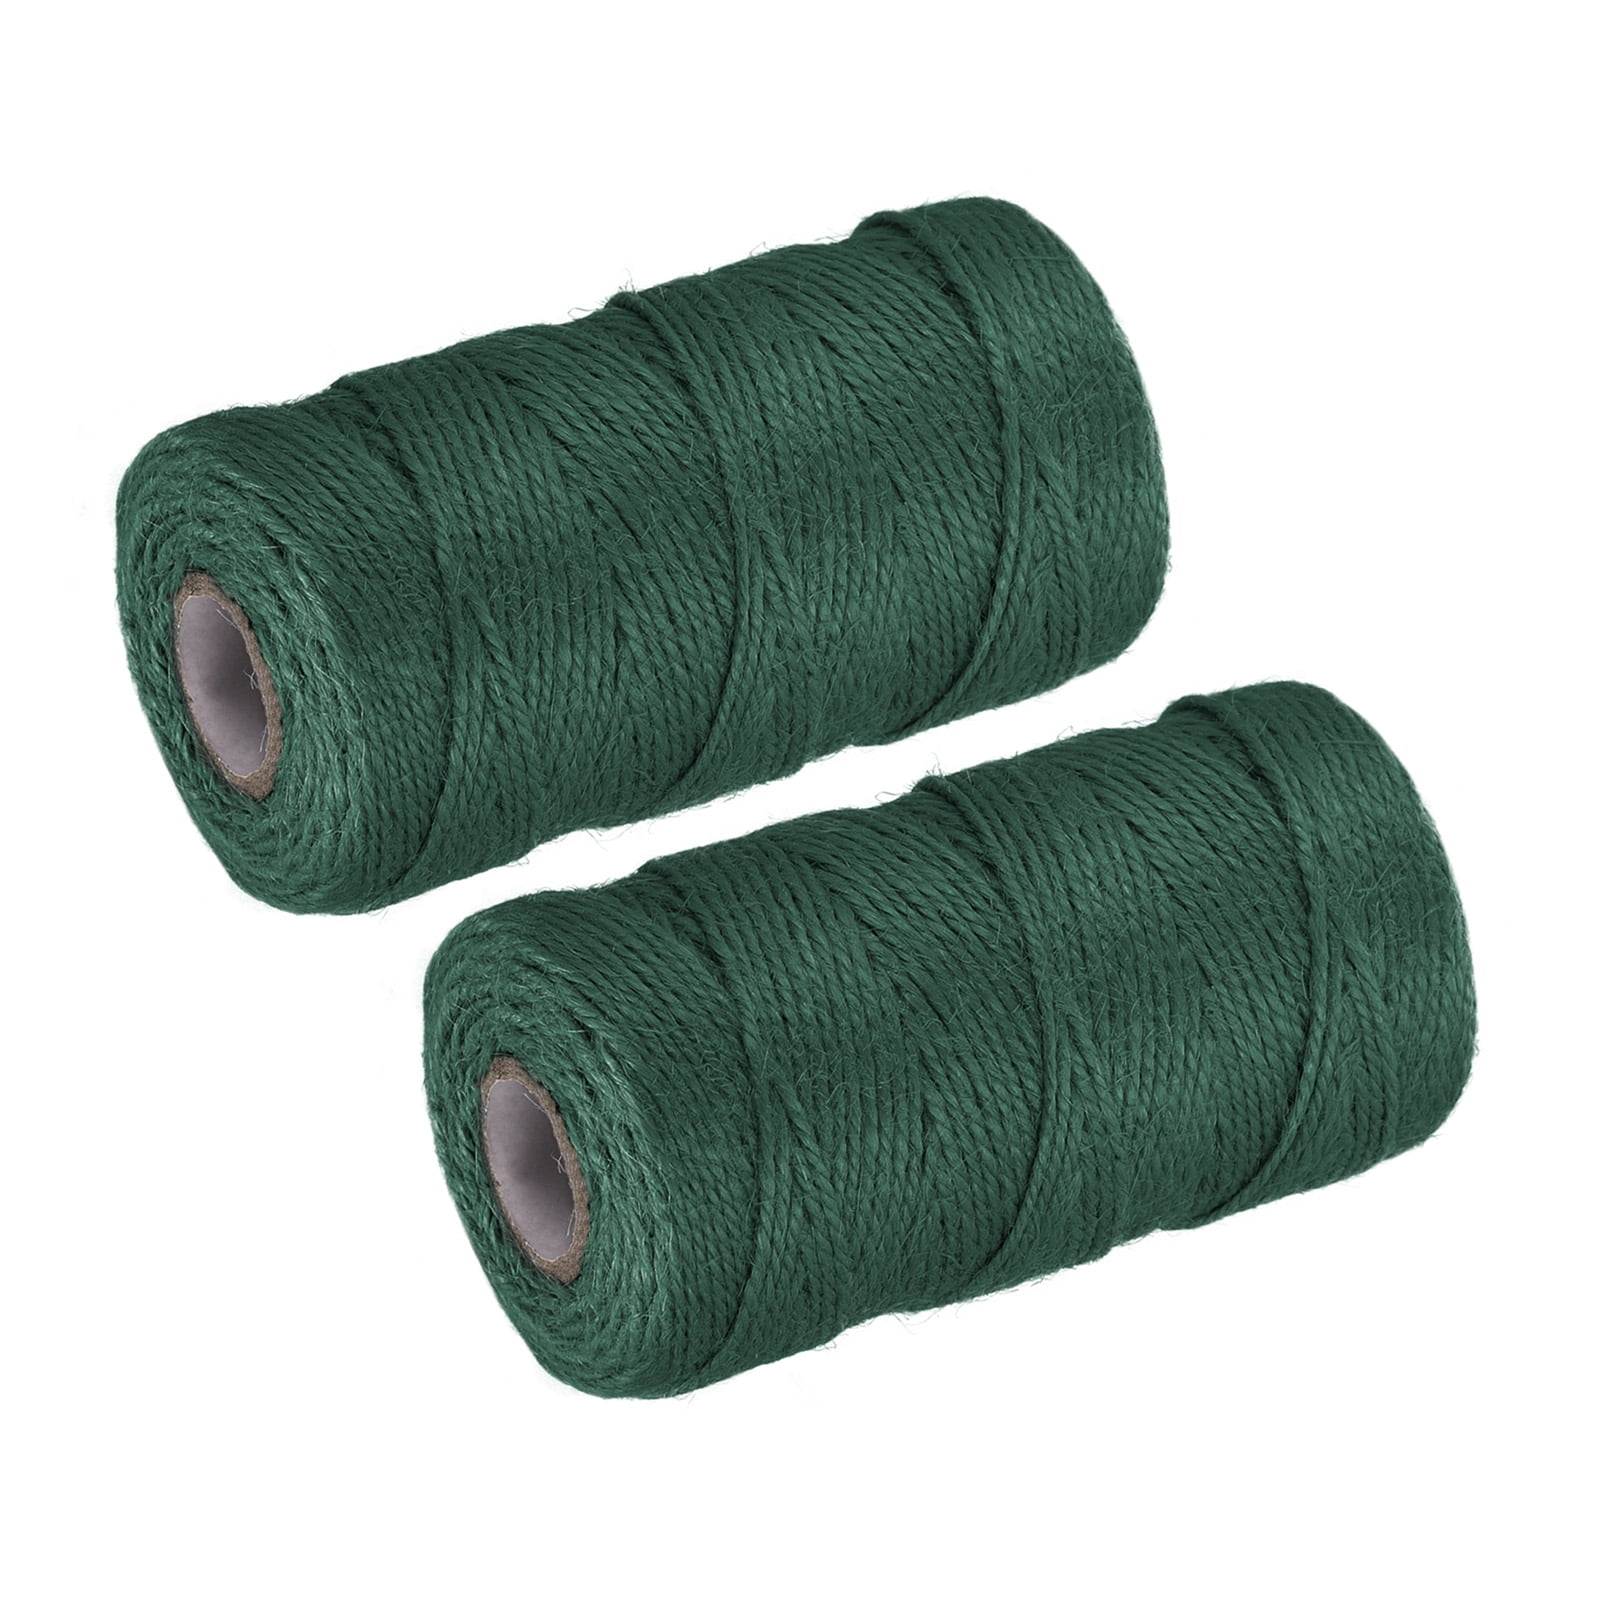 Amistad 328 ft. 1 mm Cotton DIY Decorative Rope Packing Twine, Green &  White - 2 Piece